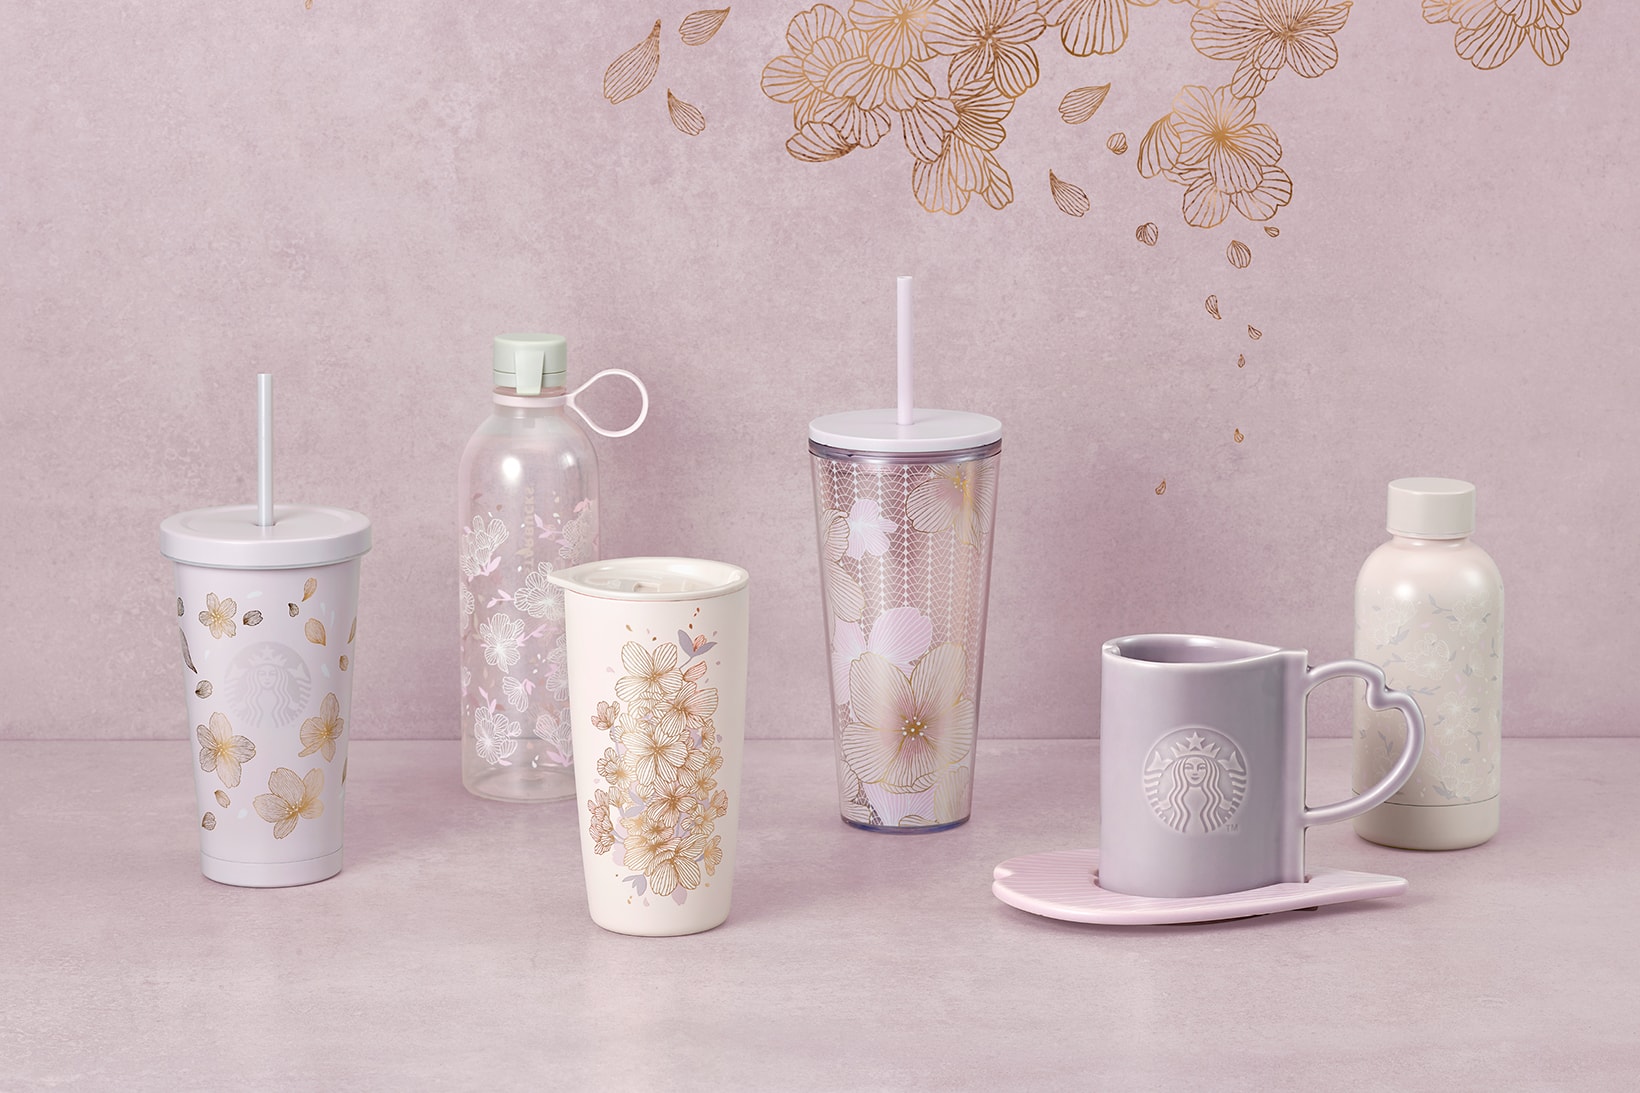 These Starbucks Mugs And Tumblers Are Designed For Cherry Blossom Season  And They Are Breathtaking